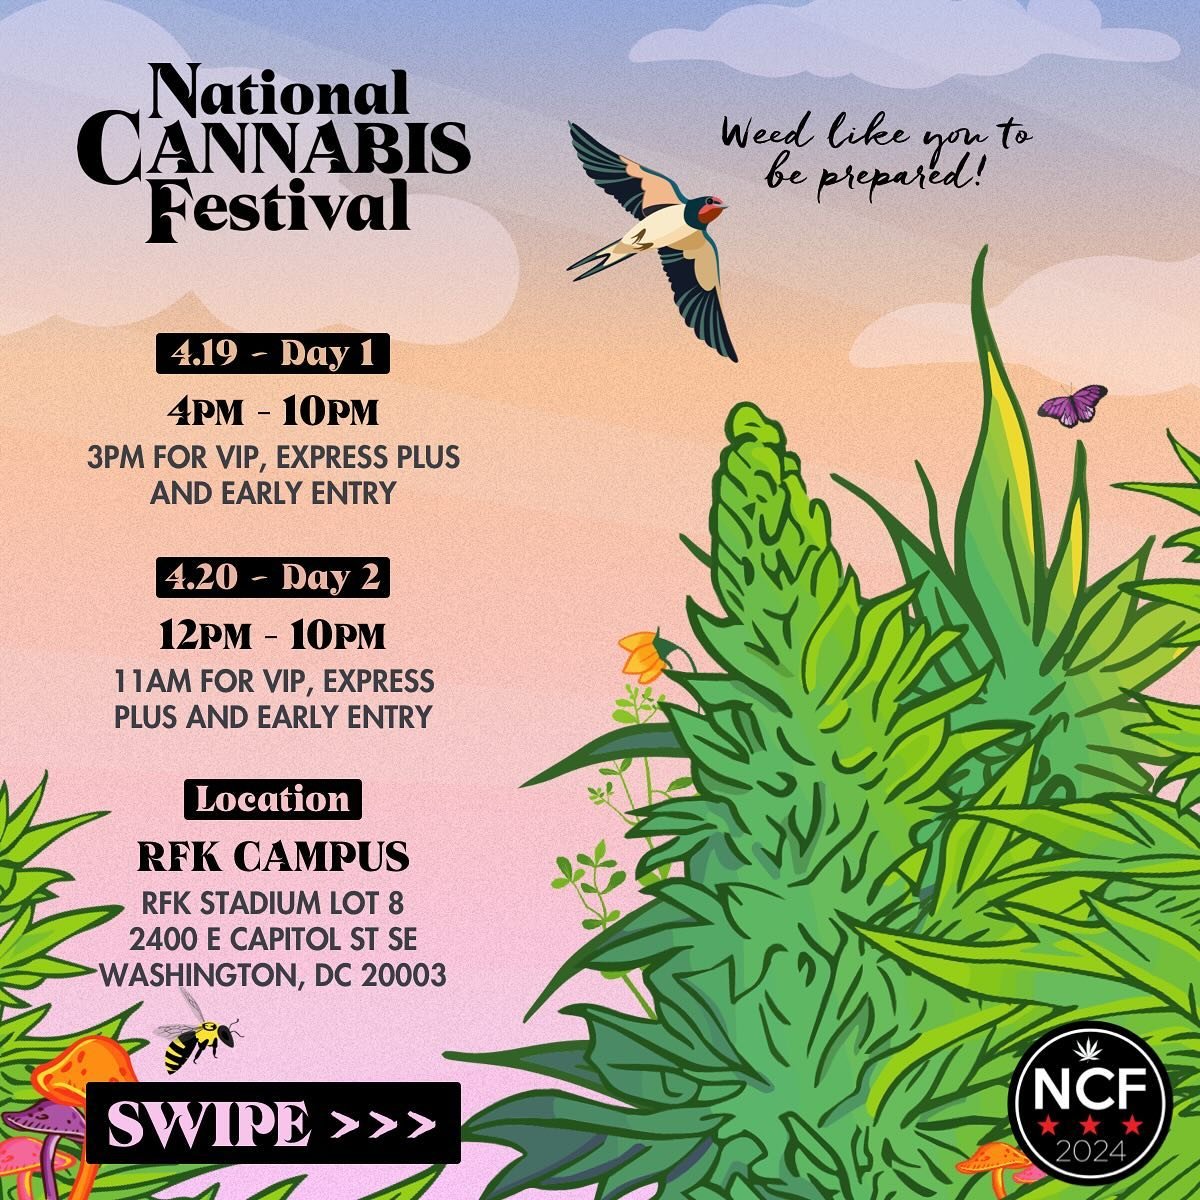 Get ready for a legendary 420 Weekend! 🔥 SWIPE for everything you need to know to enjoy our most epic NCF yet.

@wutangclan 
@thundercatmusic